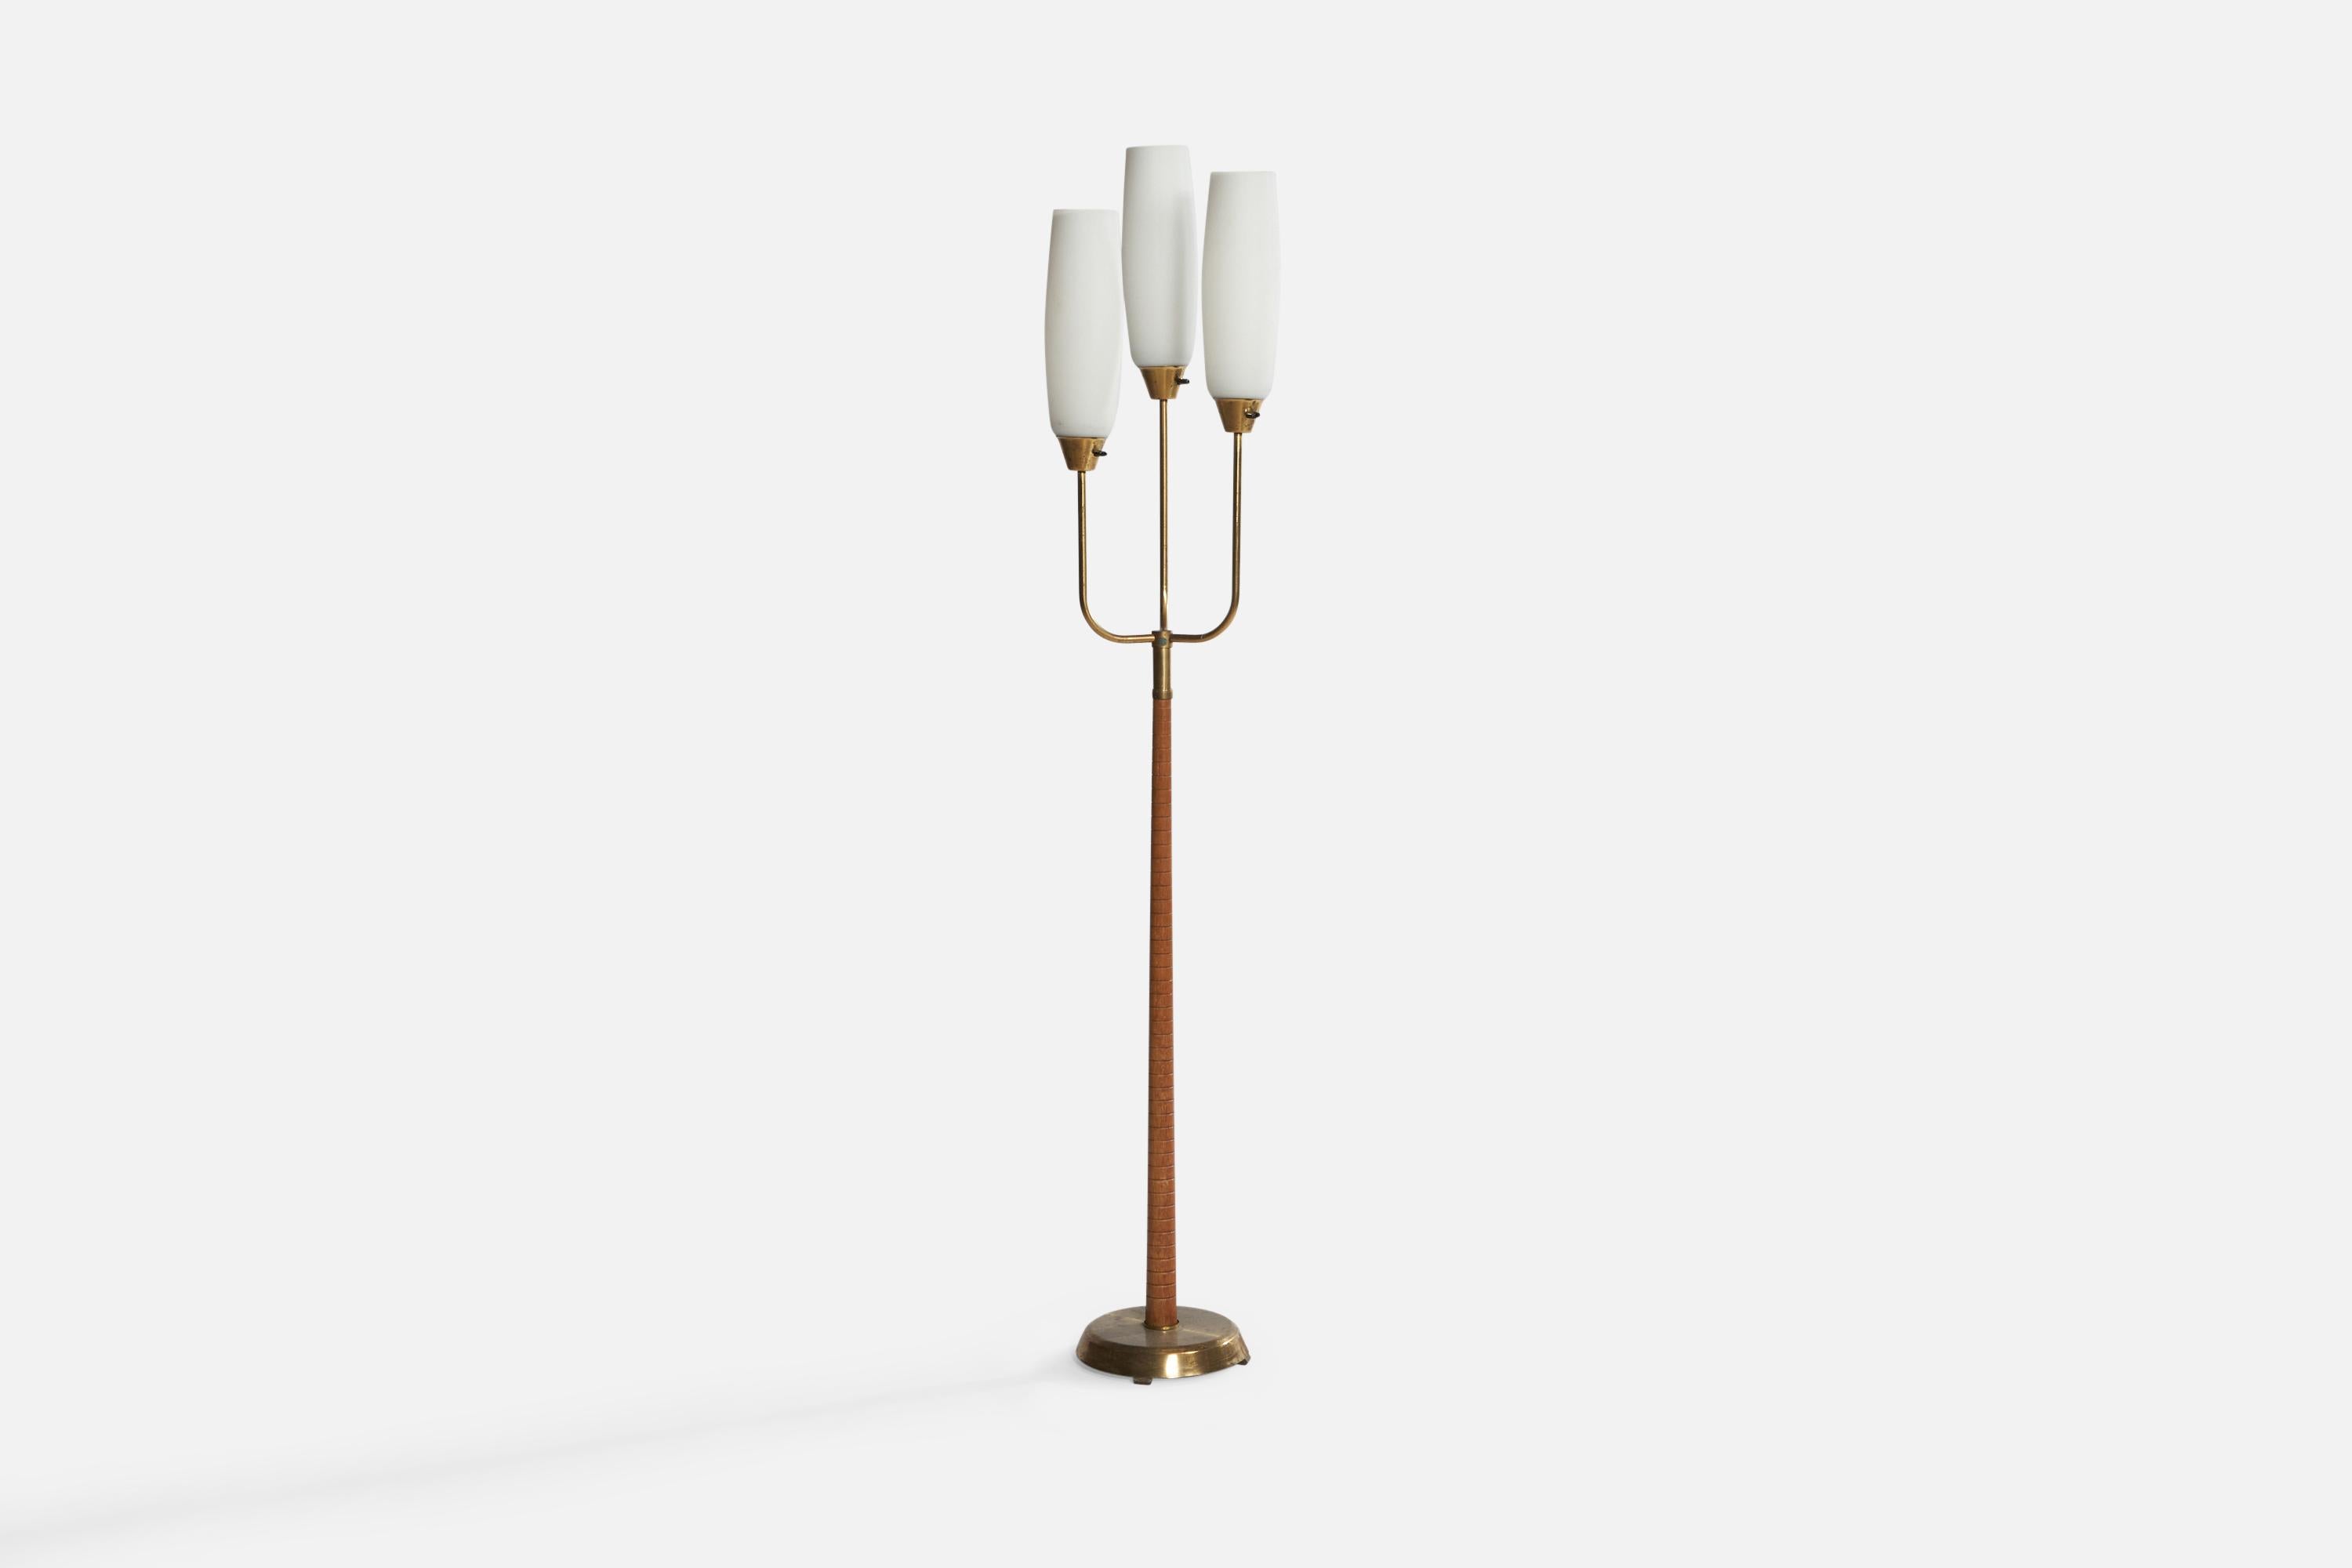 A three-armed brass, elm and opaline glass floor lamp designed and produced by GEMI, Sweden, 1940s.

Overall Dimensions (inches): 70.75” H x 12.5” W 13.5” D. Stated dimensions include shades.

Bulb Specifications: E-26 Bulbs

Number of Sockets: